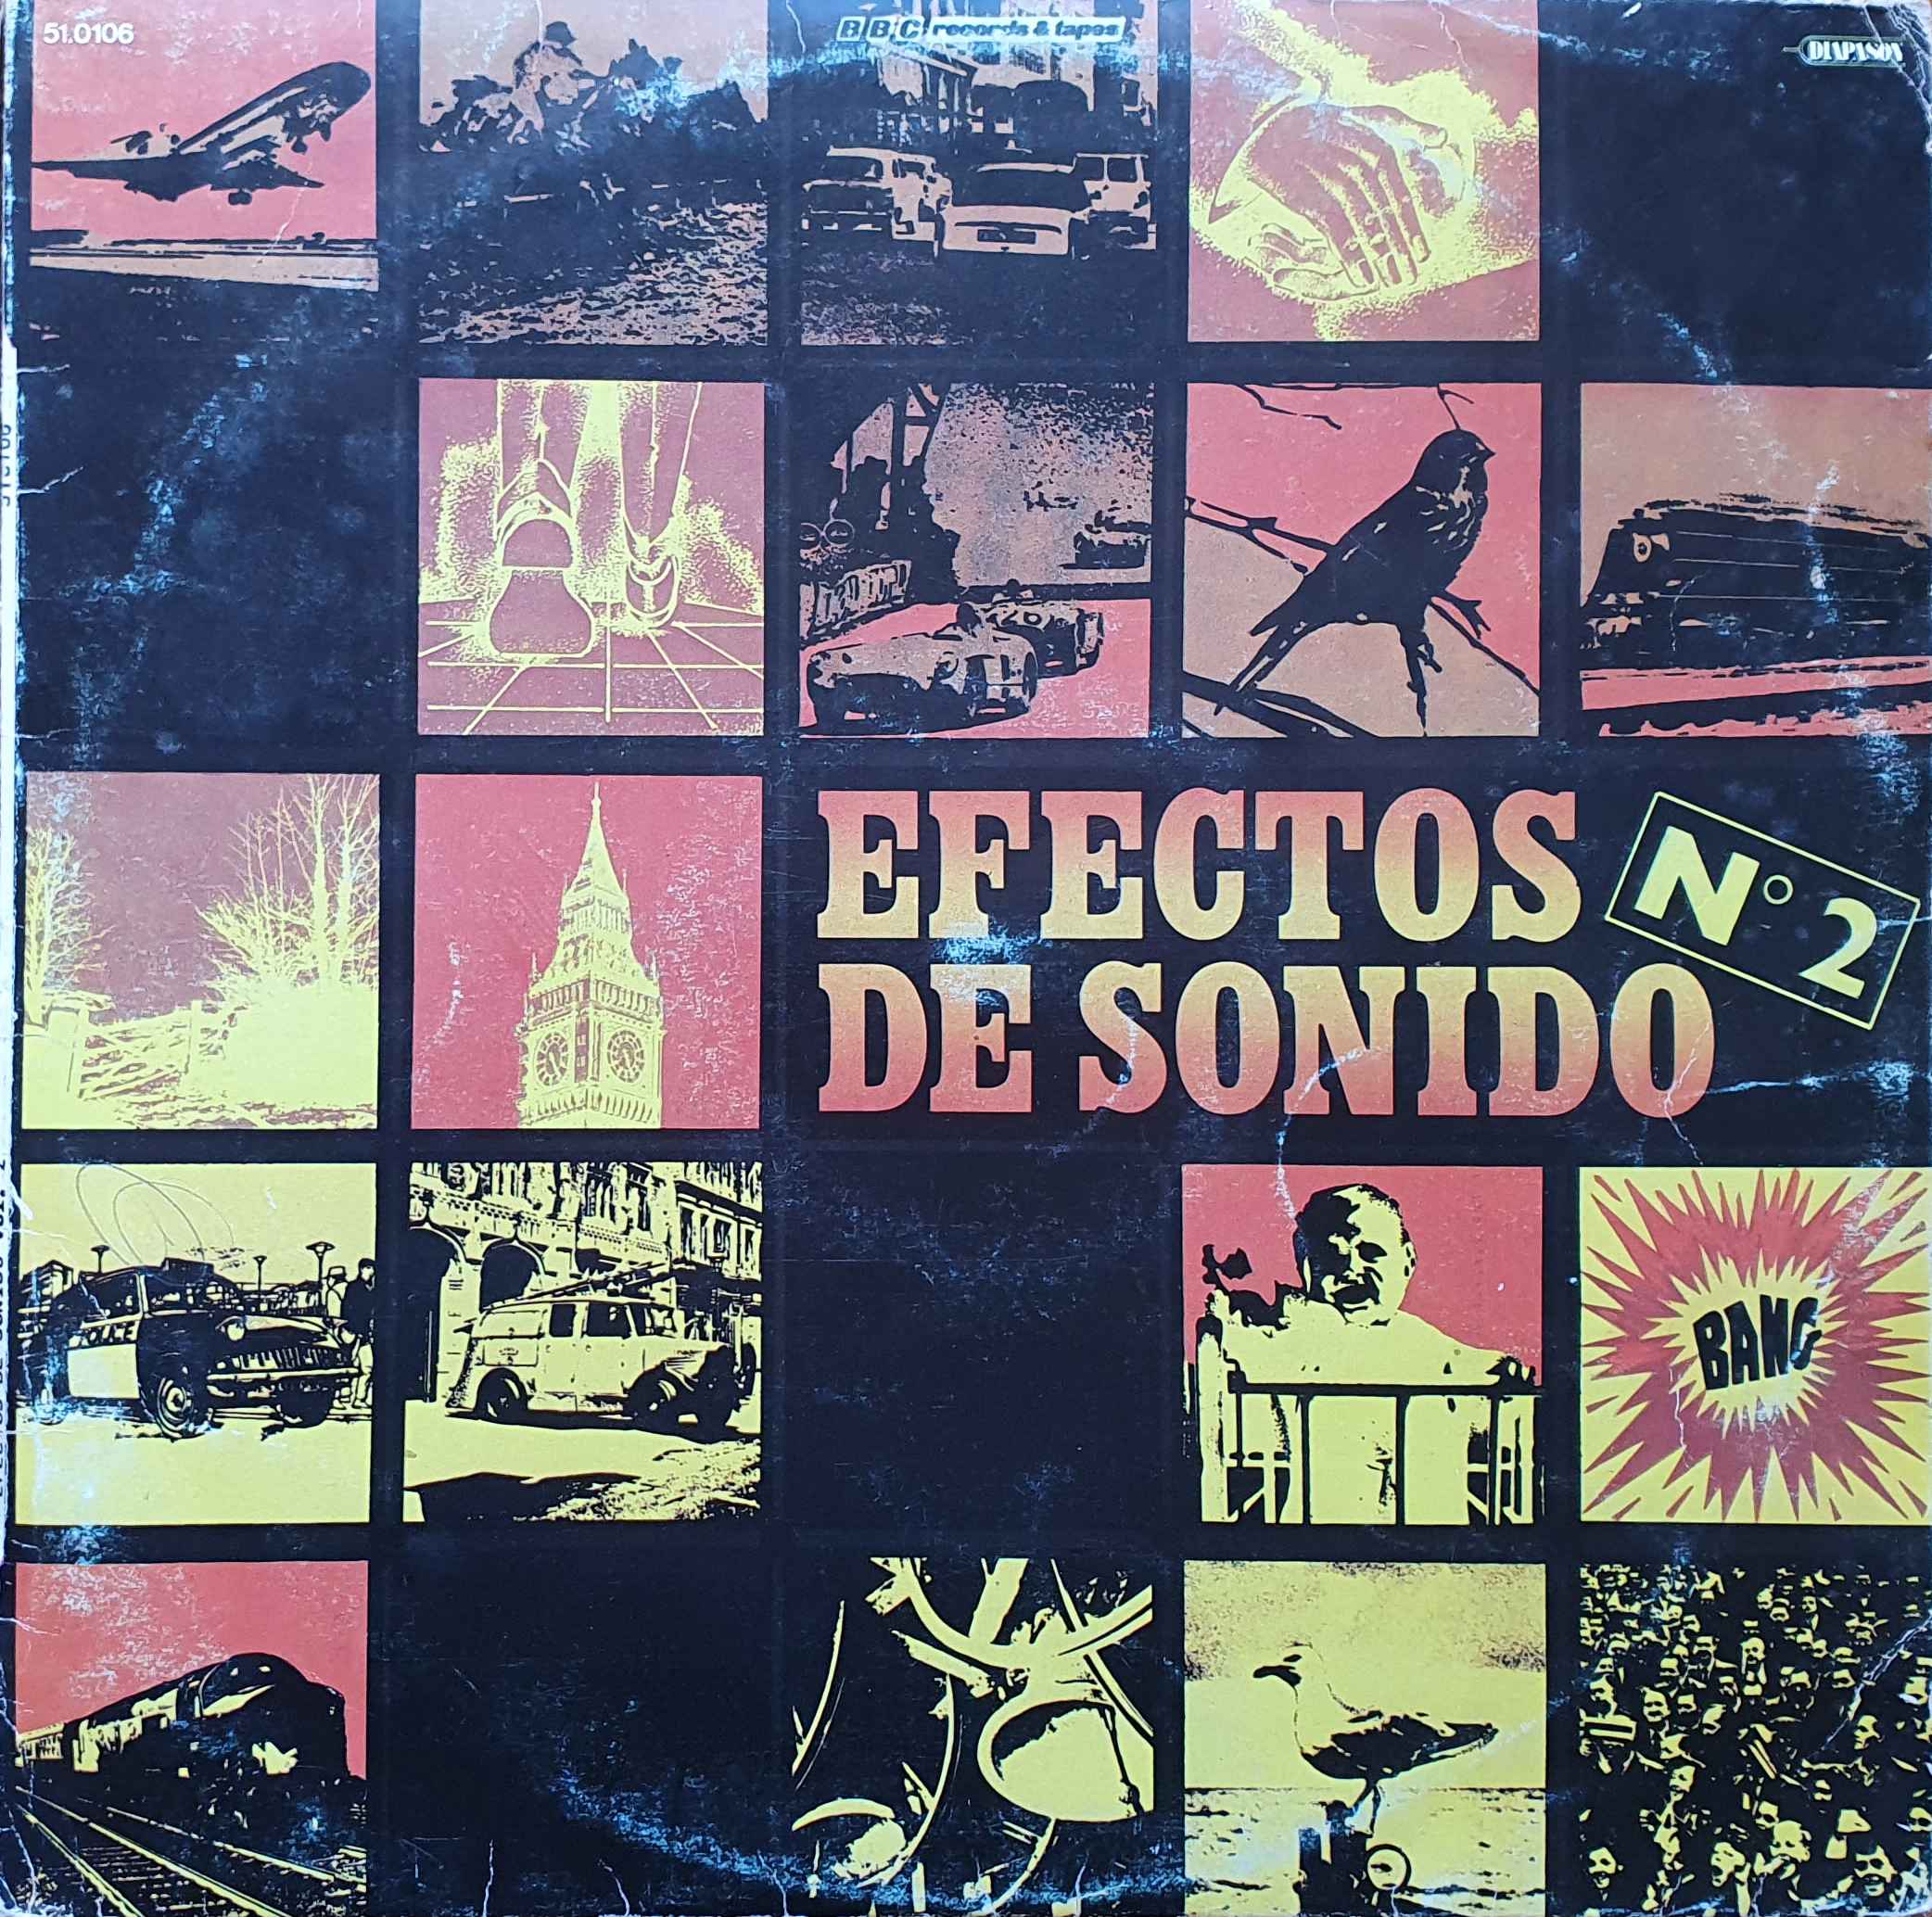 Picture of 51.0106 Efectos de sonido No 2 by artist Various from the BBC albums - Records and Tapes library